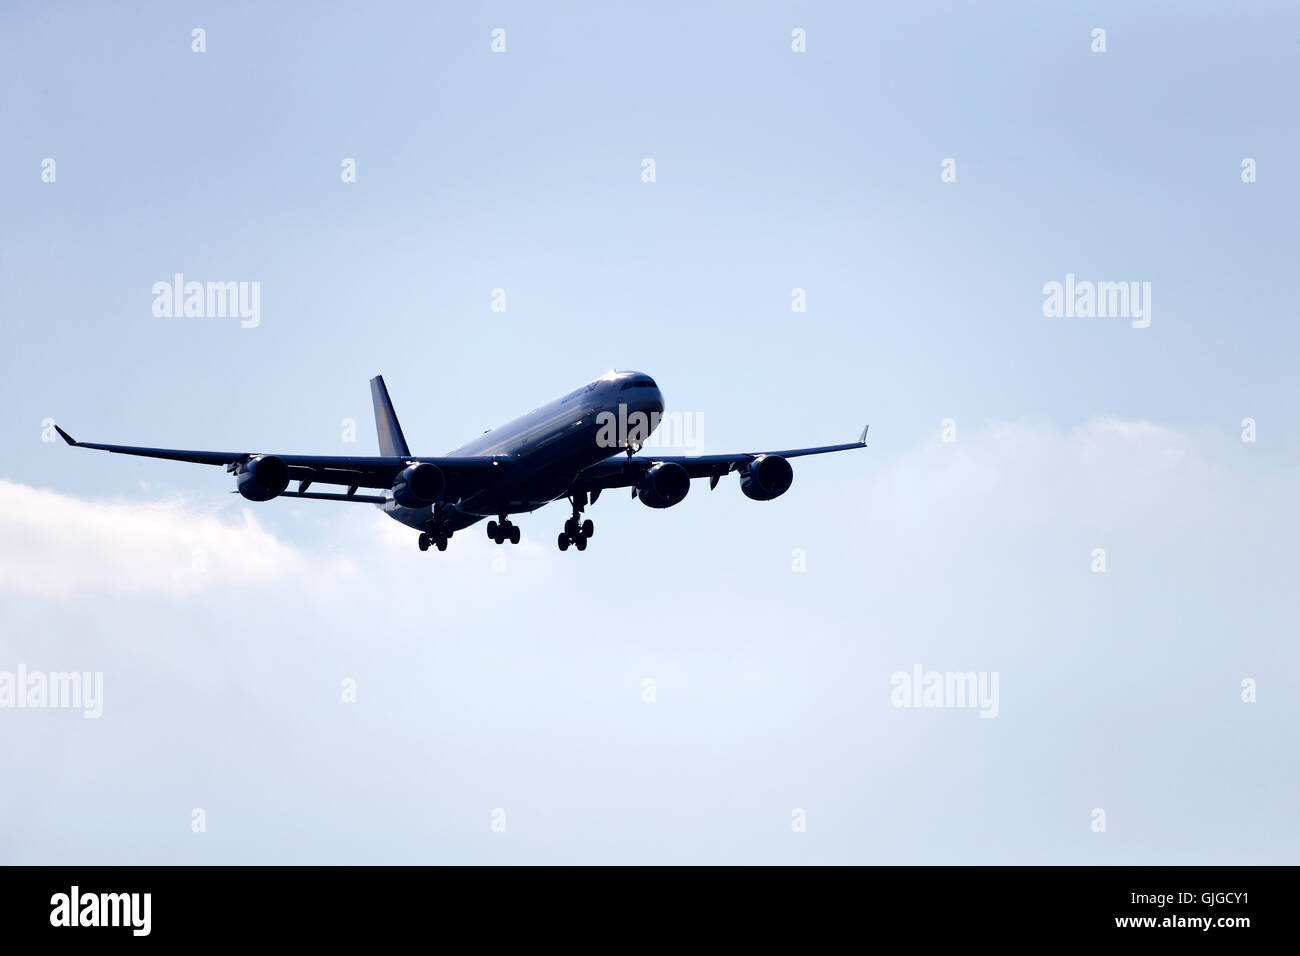 Lufthansa Airbus A340-800 on approach to landing at Franz Josef Strauss Airport, Munich, Upper Bavaria, Germany, Europe. Stock Photo